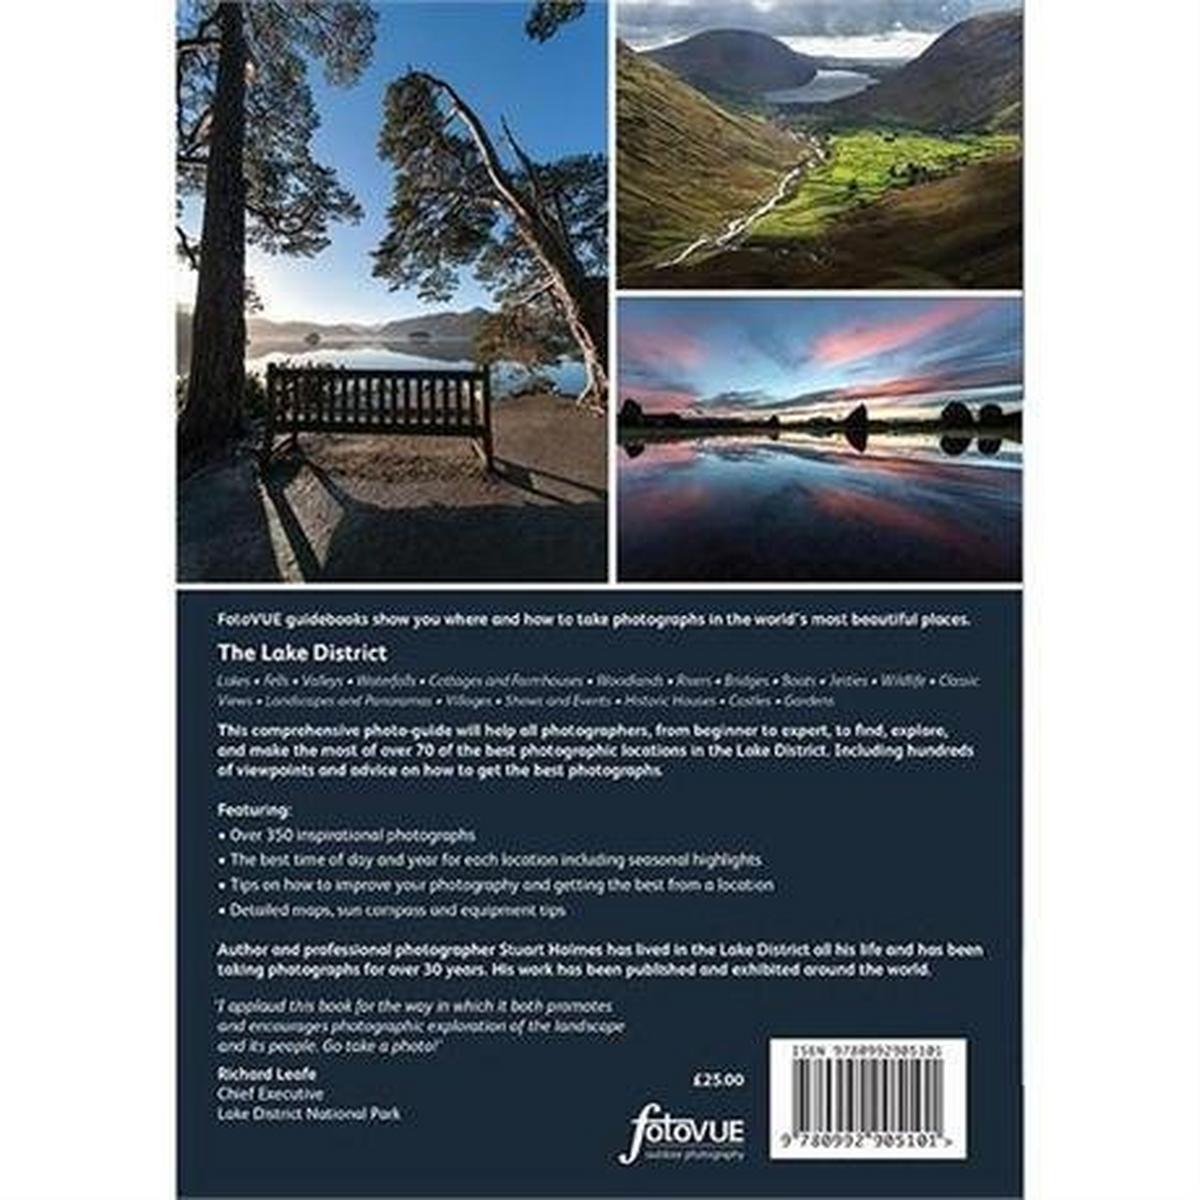 Miscellaneous FotoVUE Book: Photographing The Lake District: Stuart Holmes